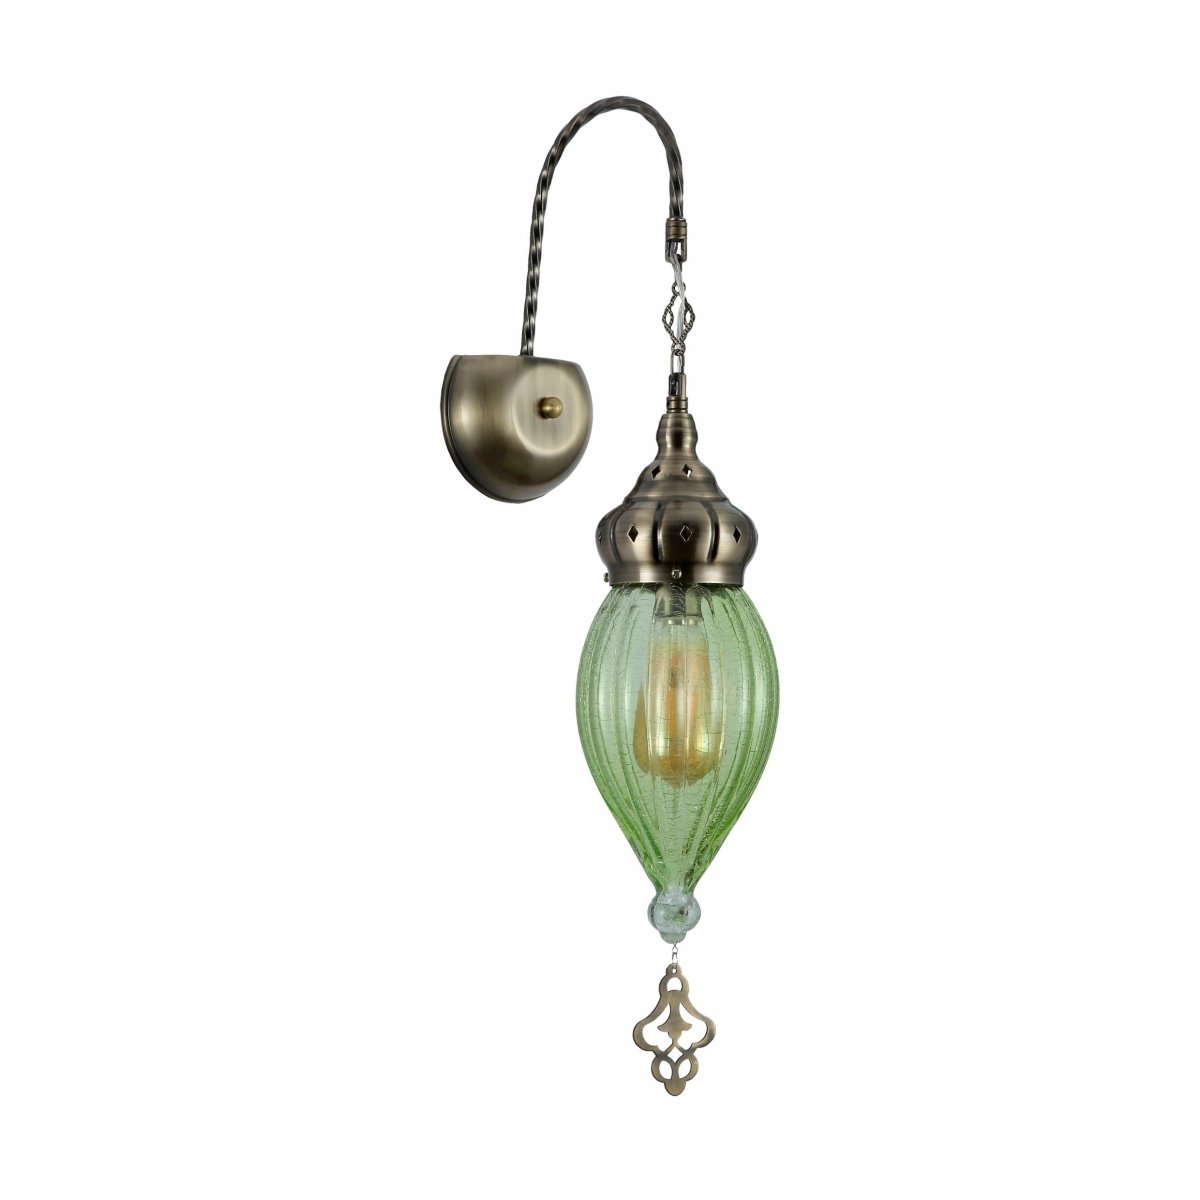 Main image of Green Glass Antique Bronze Metal Body Moroccan Style Wall Light with E27 Fitting | TEKLED 151-194580